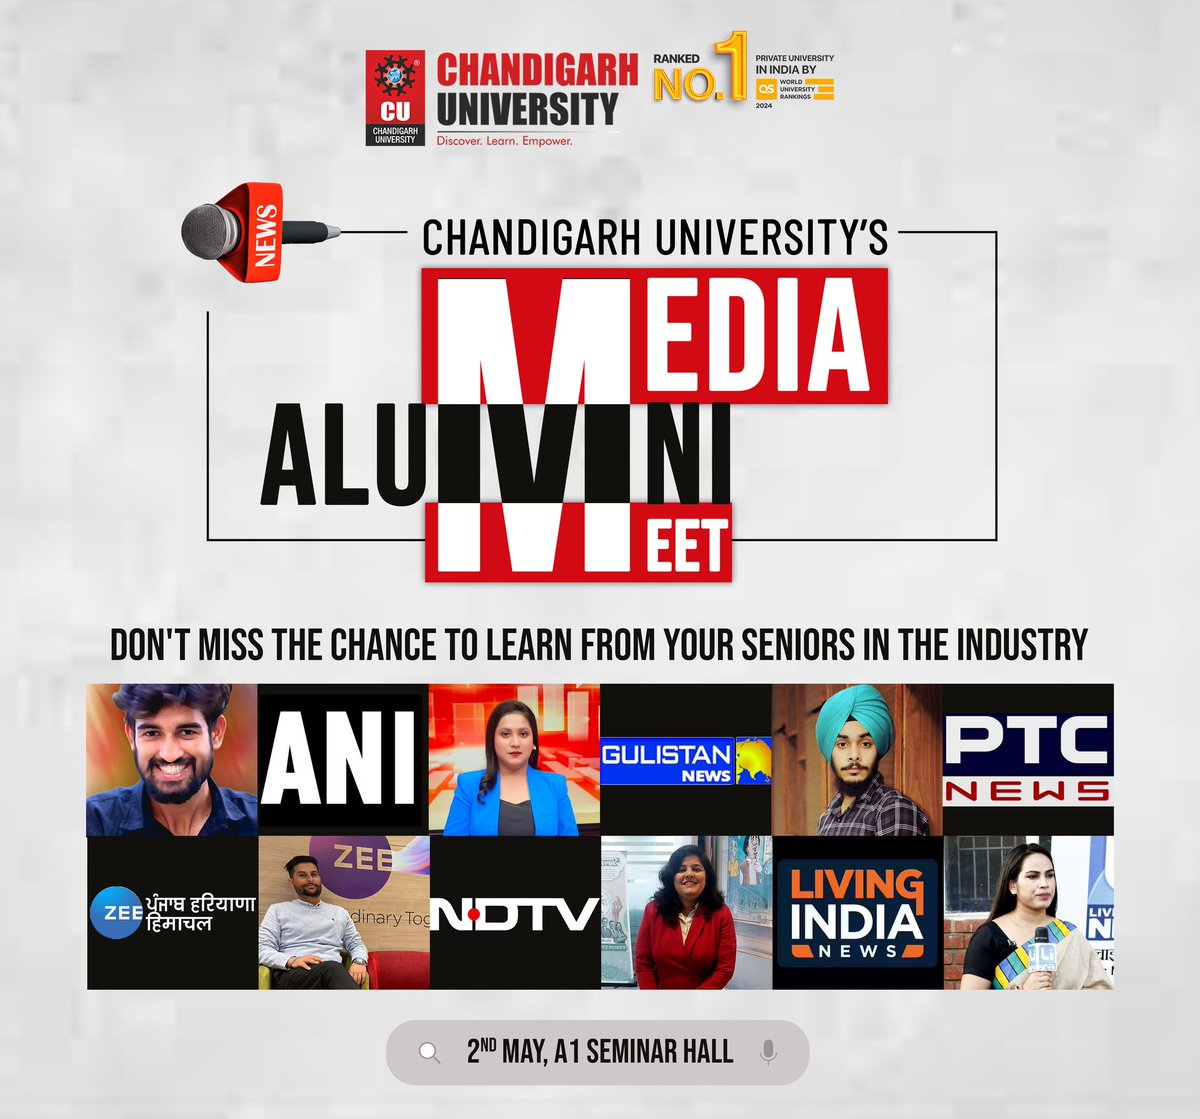 Chandigarh University presents the Media Alumni Meet, where wisdom meets experience and inspiration ignites careers!
Join us as CU Alumni from renowned media outlets converge on campus to share their invaluable insights and experiences.
#chandigarhuniversity #mediastudies